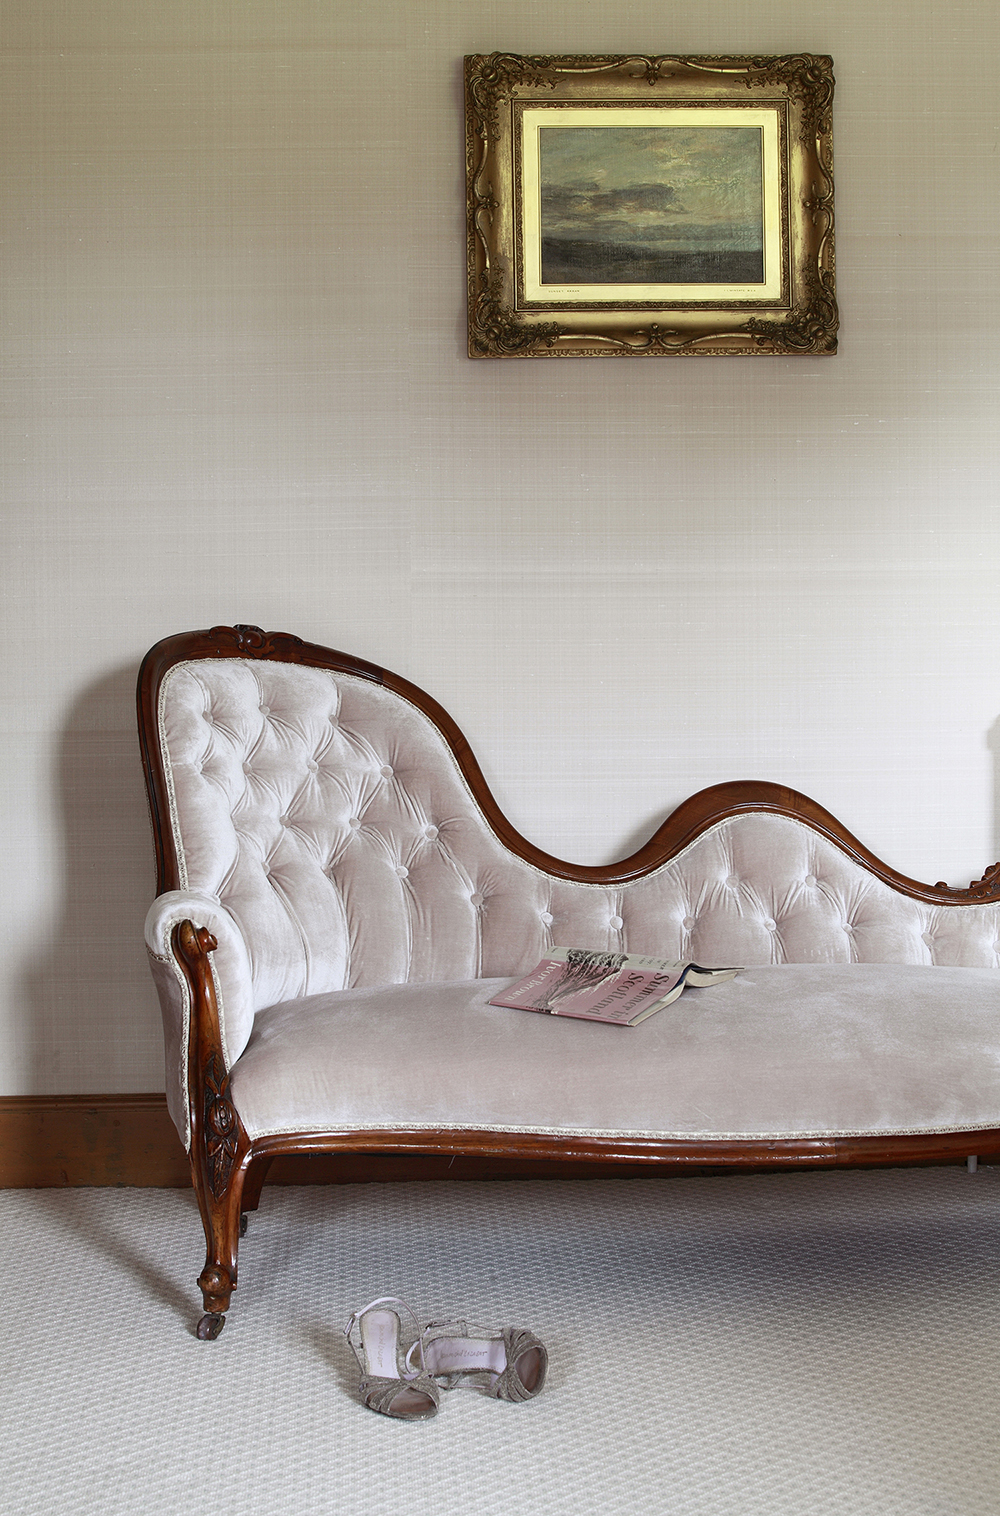 Another antique upholstered in a blush pink silk velvet.